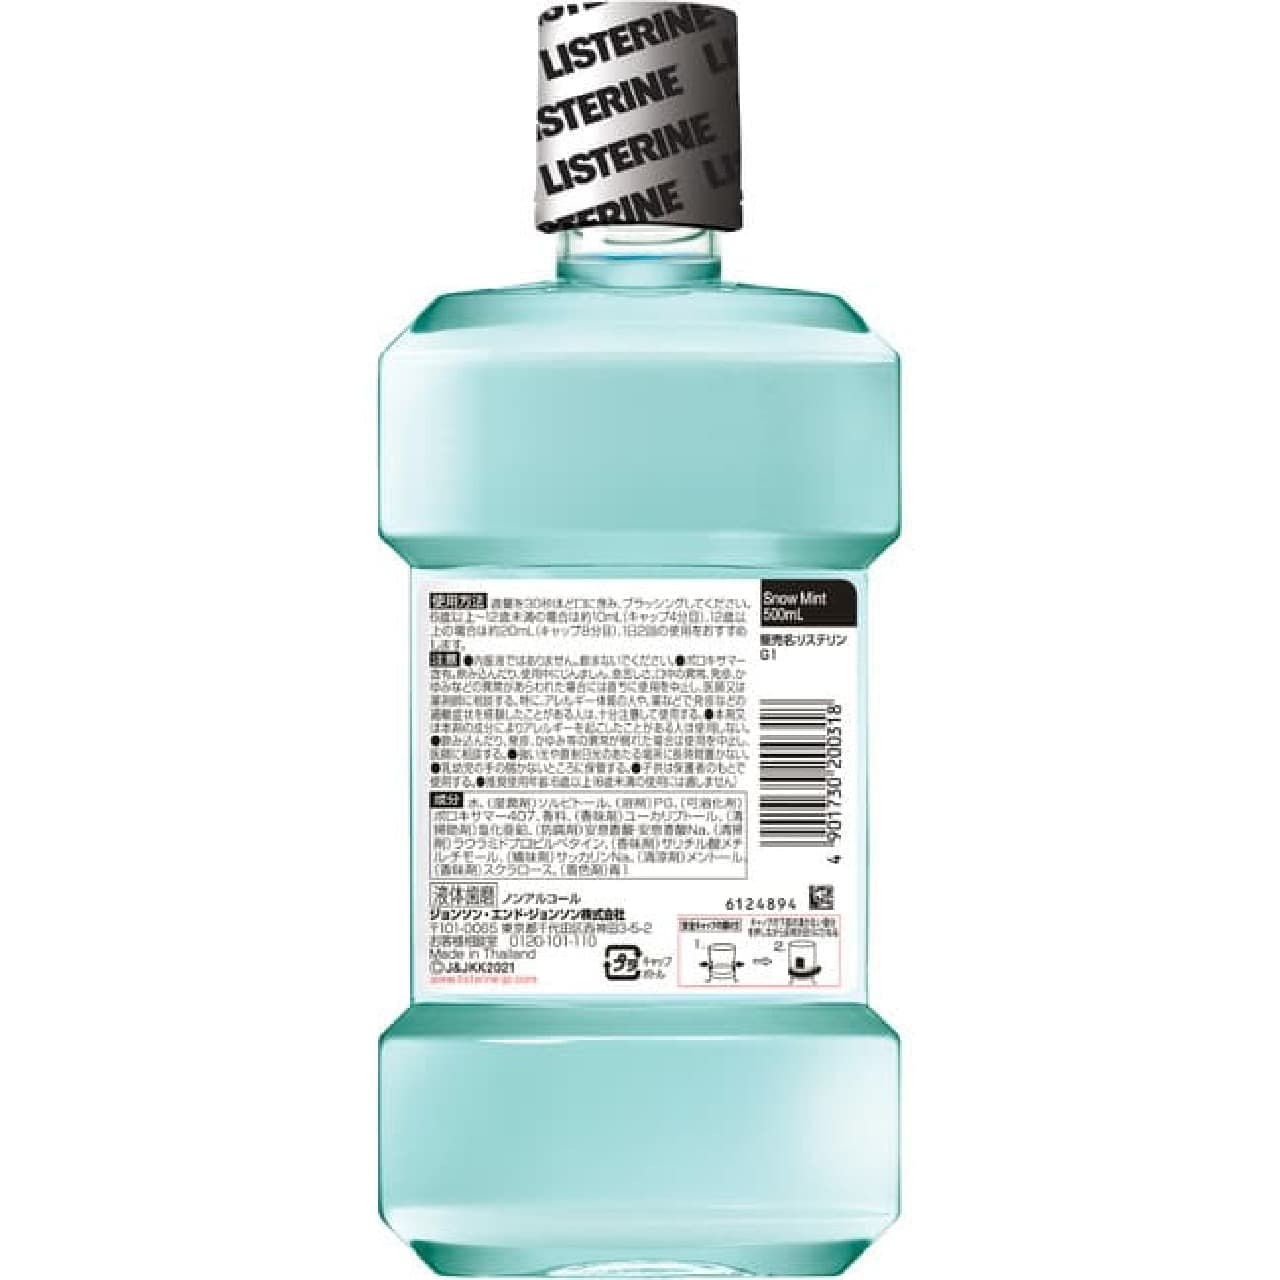 Mouthwash "Listerine Snow Mint" released --Seasonal refreshing mint flavor! For bad breath and tartar care